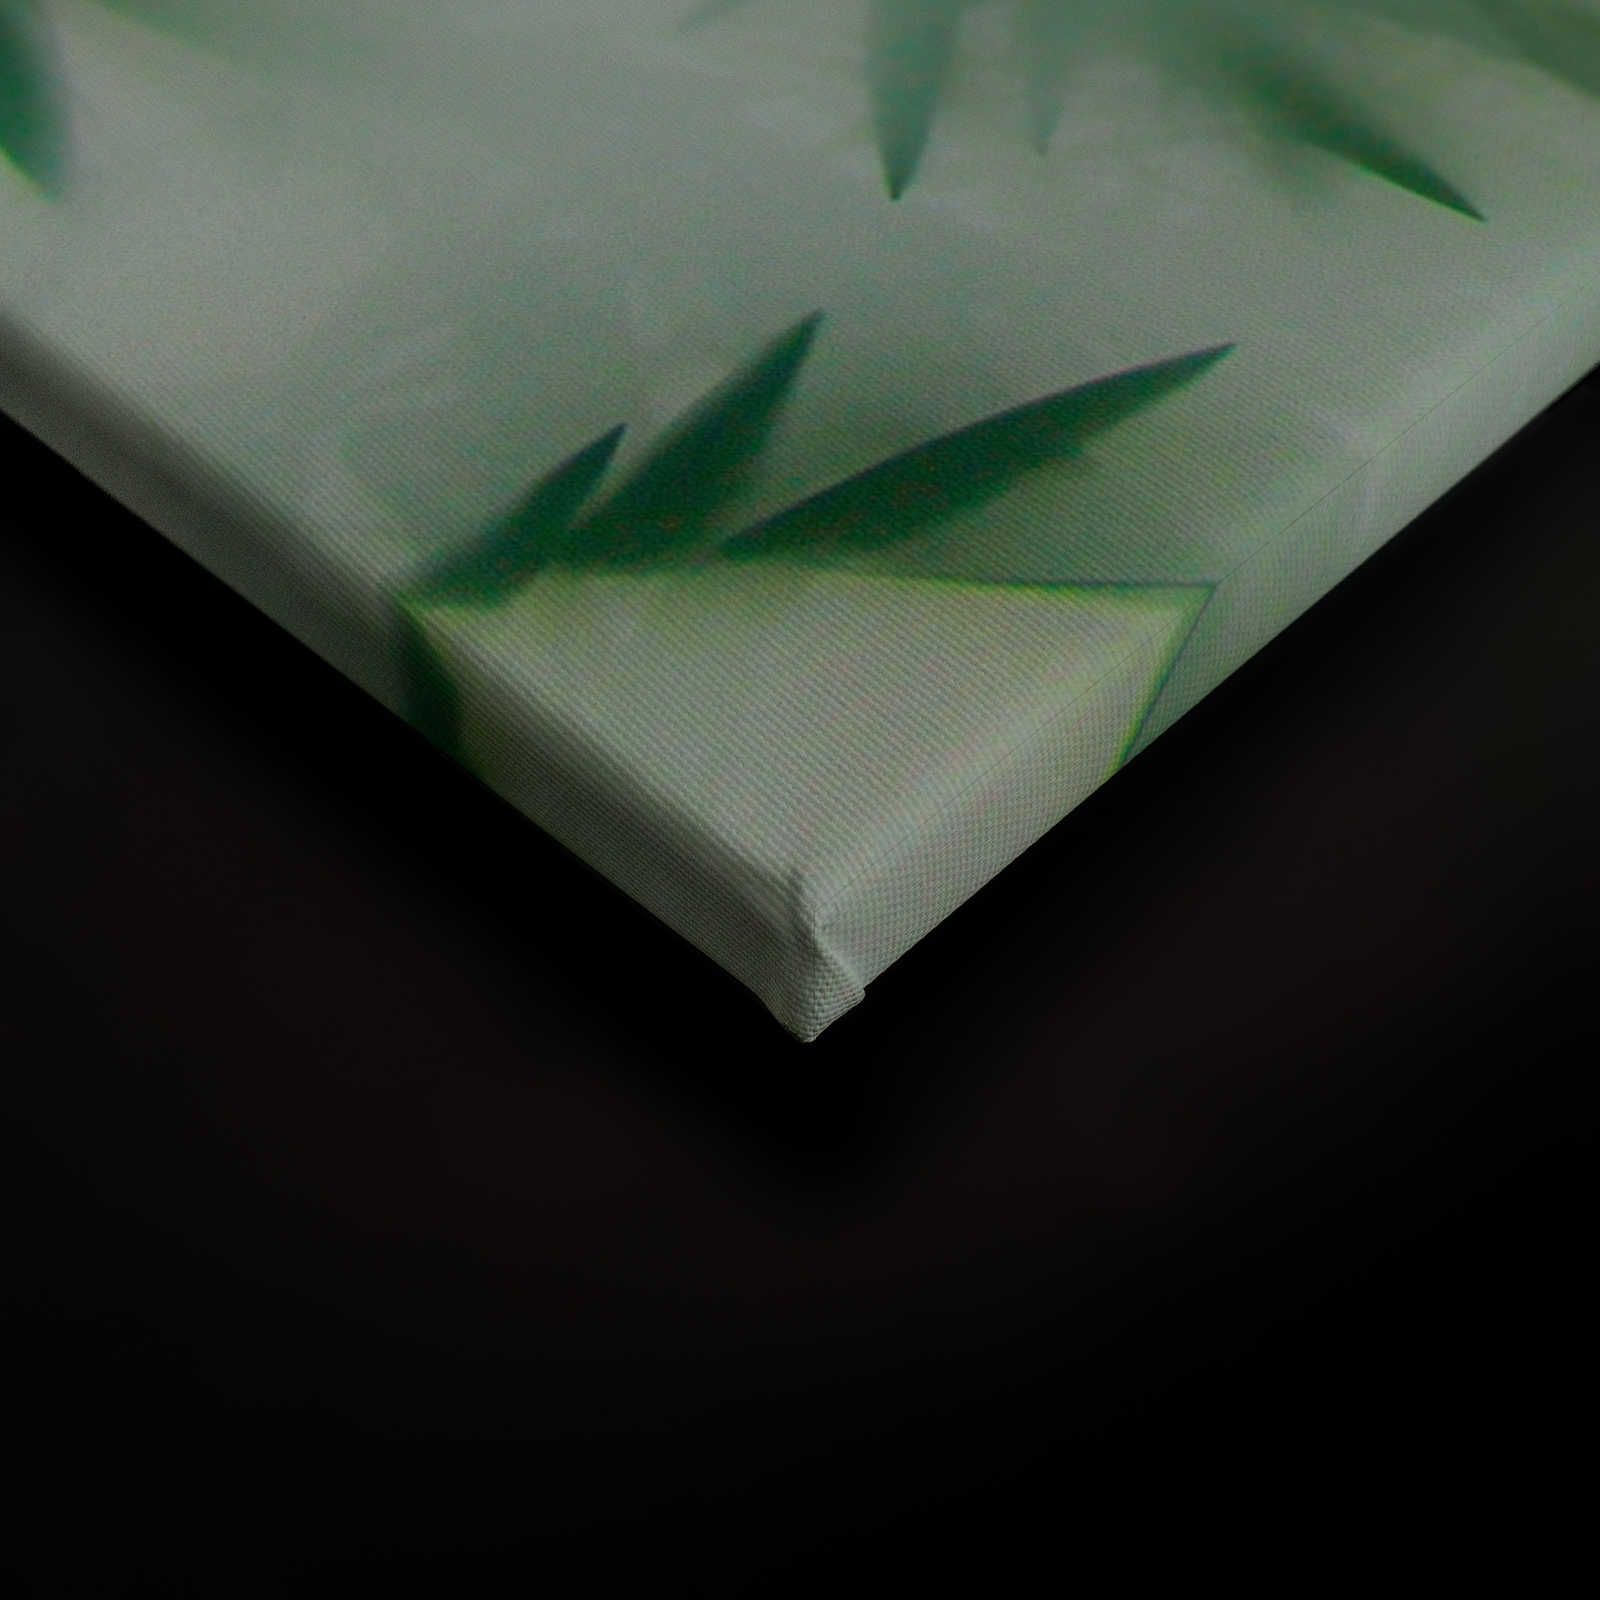             Panda Paradise 1 - Bamboo Canvas painting Green Leaves in the Mist - 1.20 m x 0.80 m
        